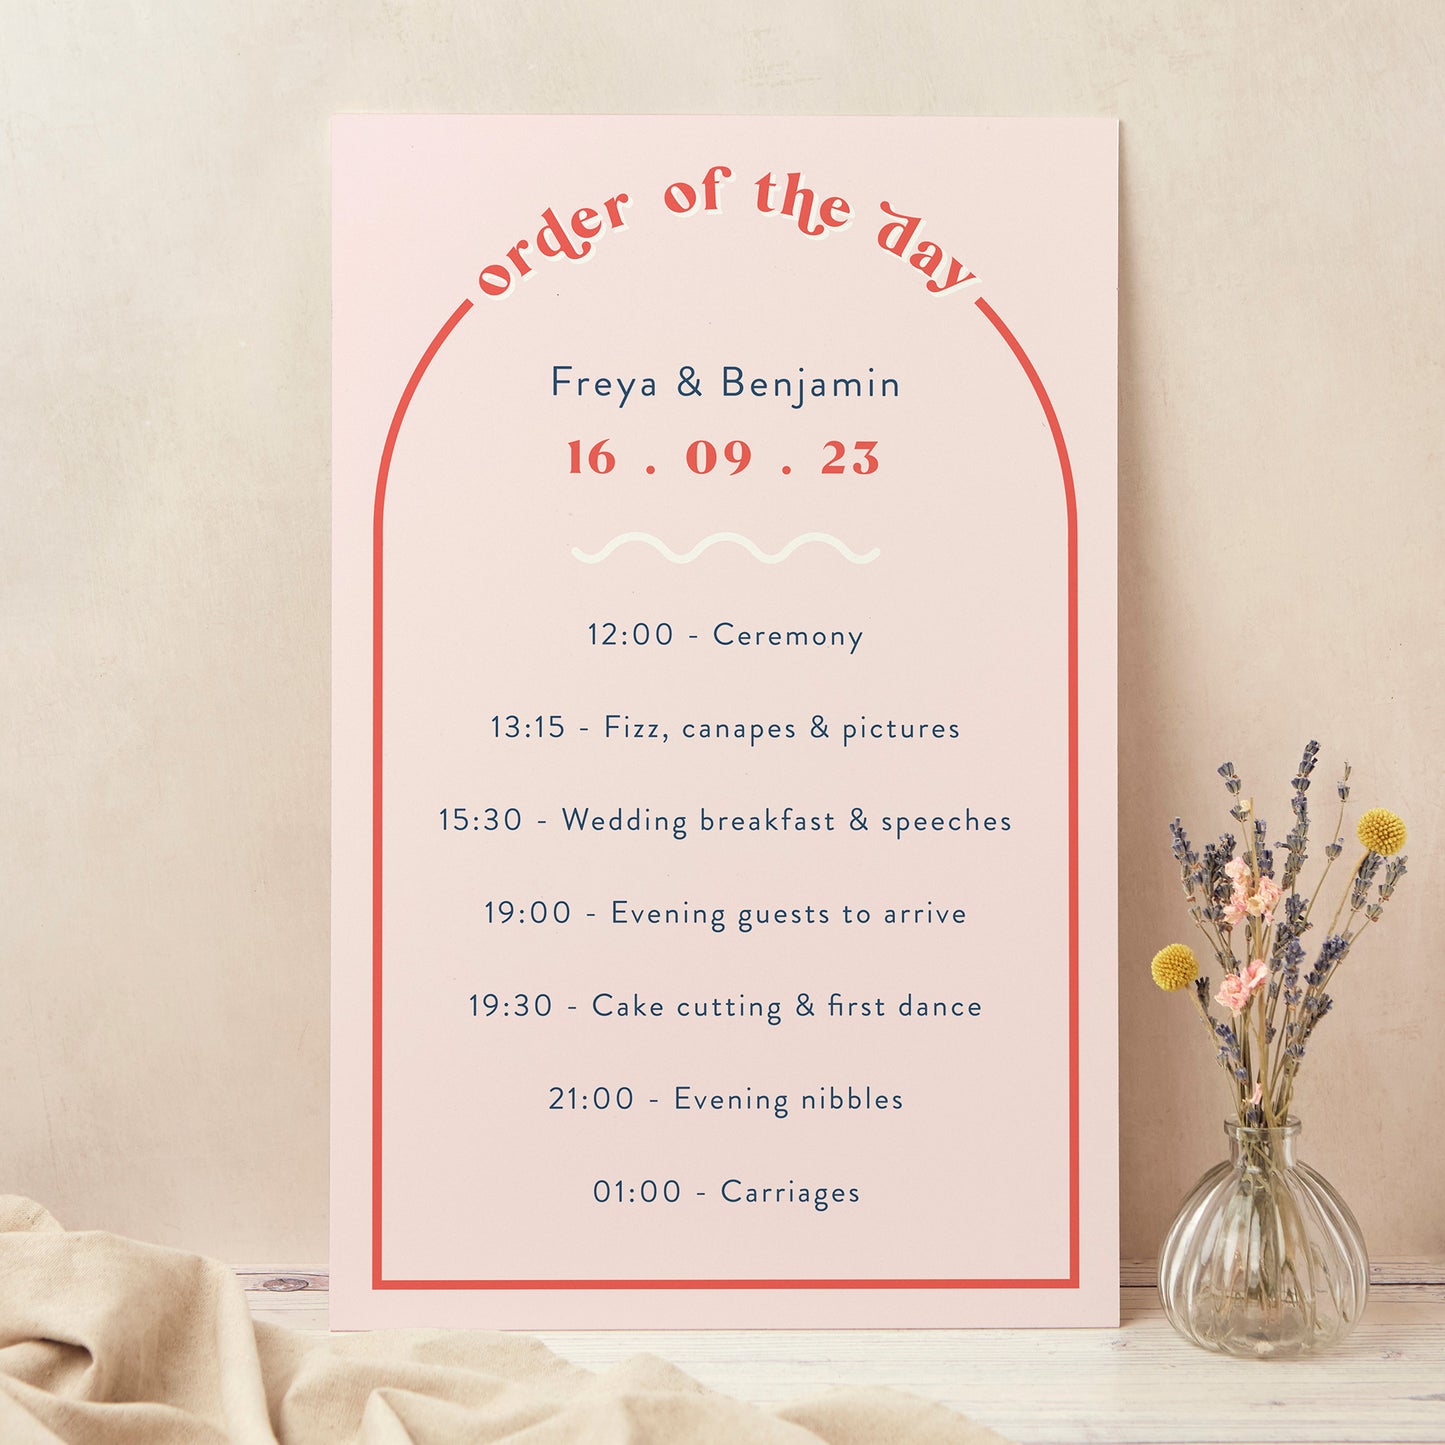 Retro Revival Wedding Order of the Day Sign